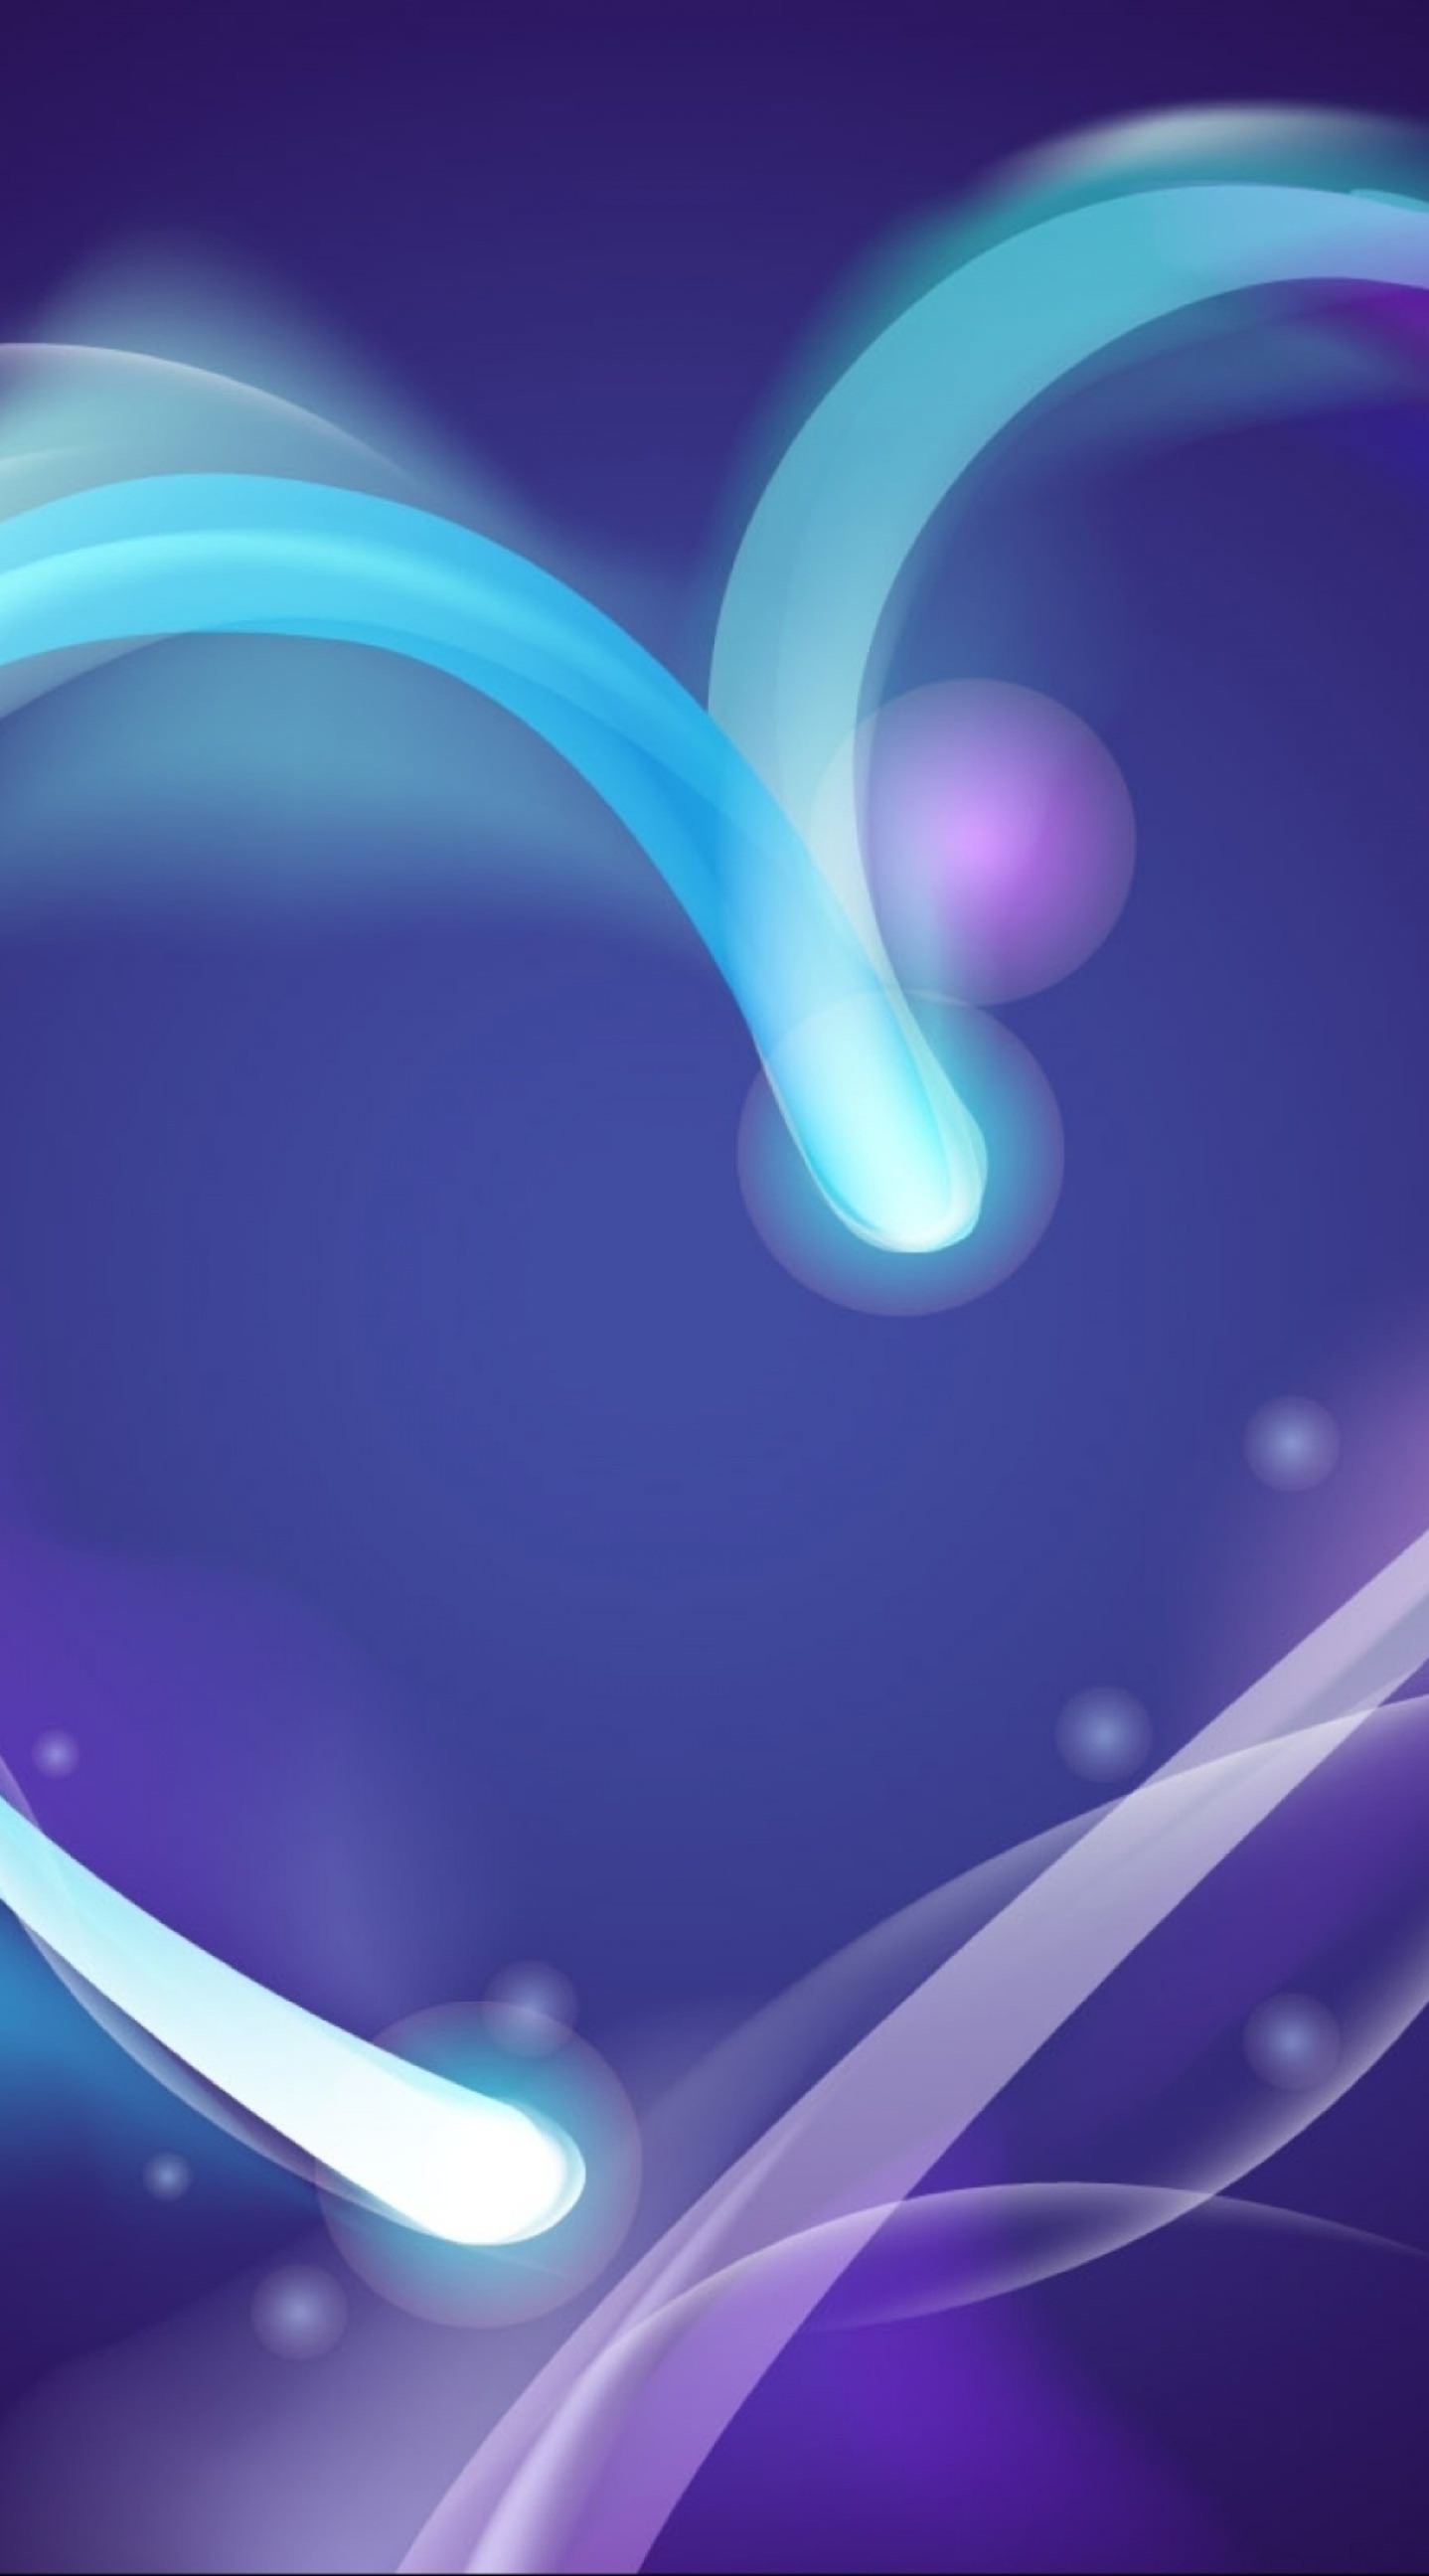 wallpaper related to love,blue,violet,purple,light,graphic design